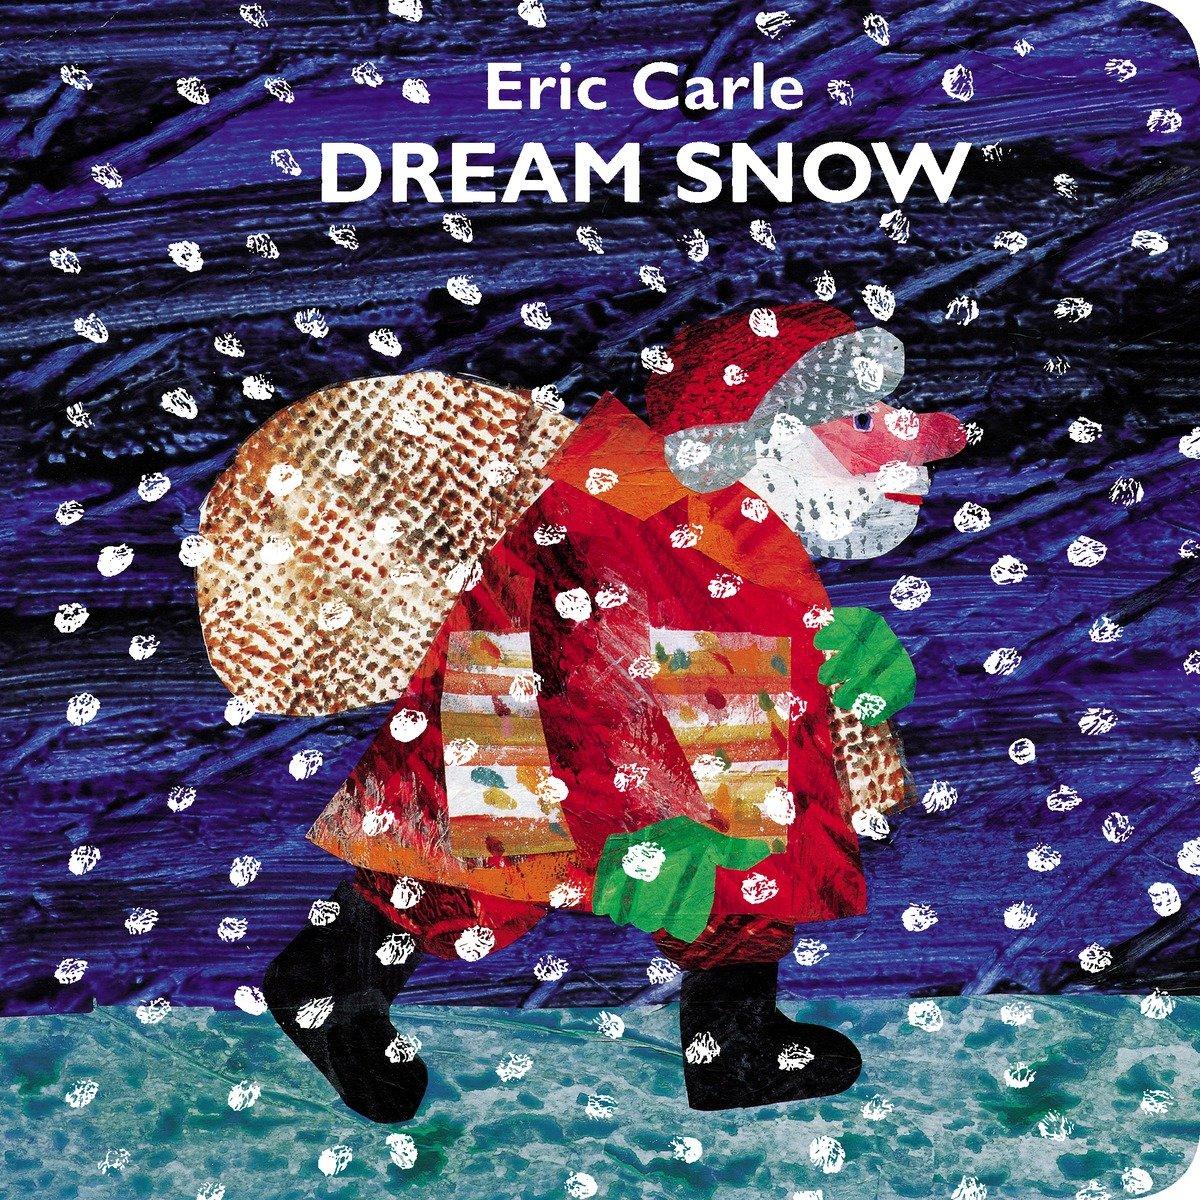 Dream Snow / Eric Carle / Buch / Englisch / 2015 / Penguin Young Readers Group / EAN 9780399173141 - Carle, Eric